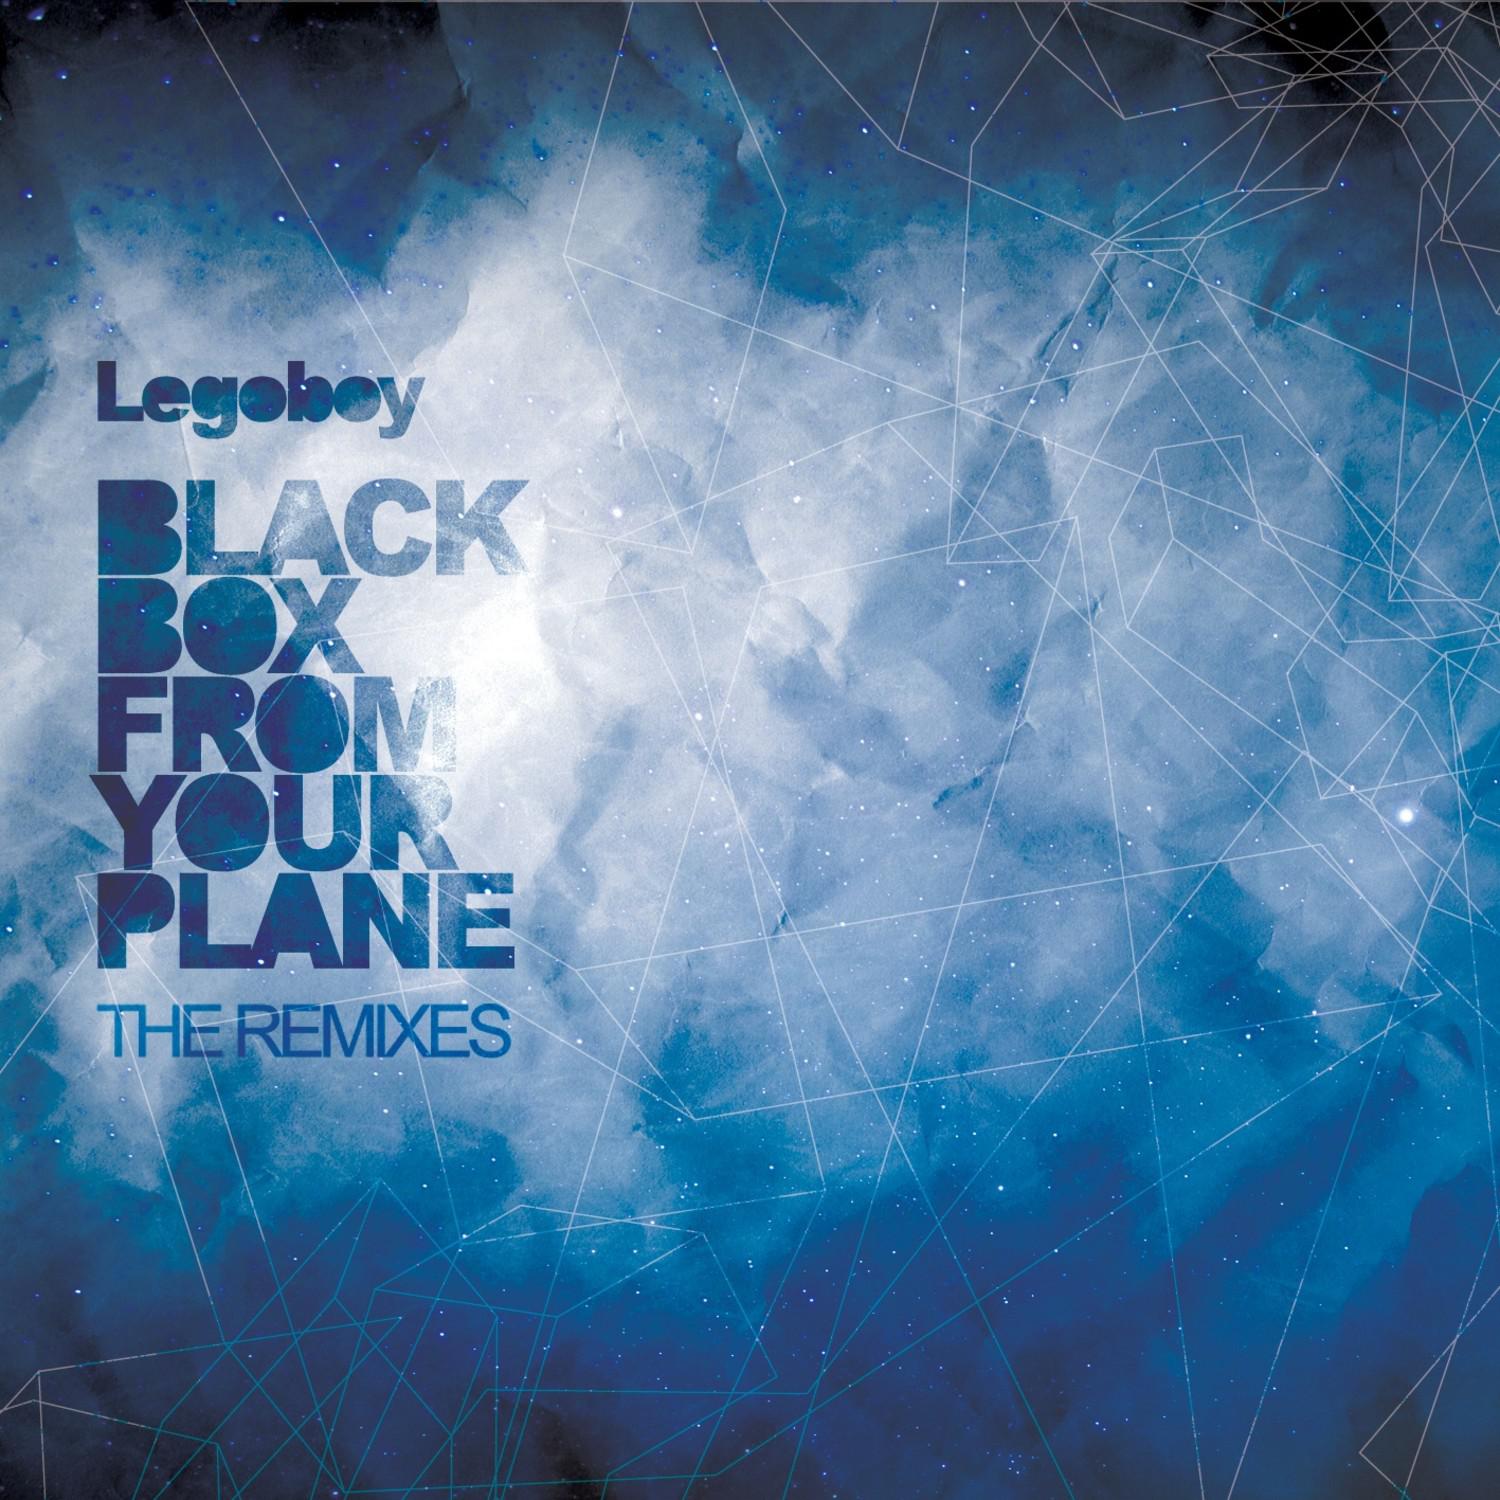 Black Box From Your Plane The Remixes